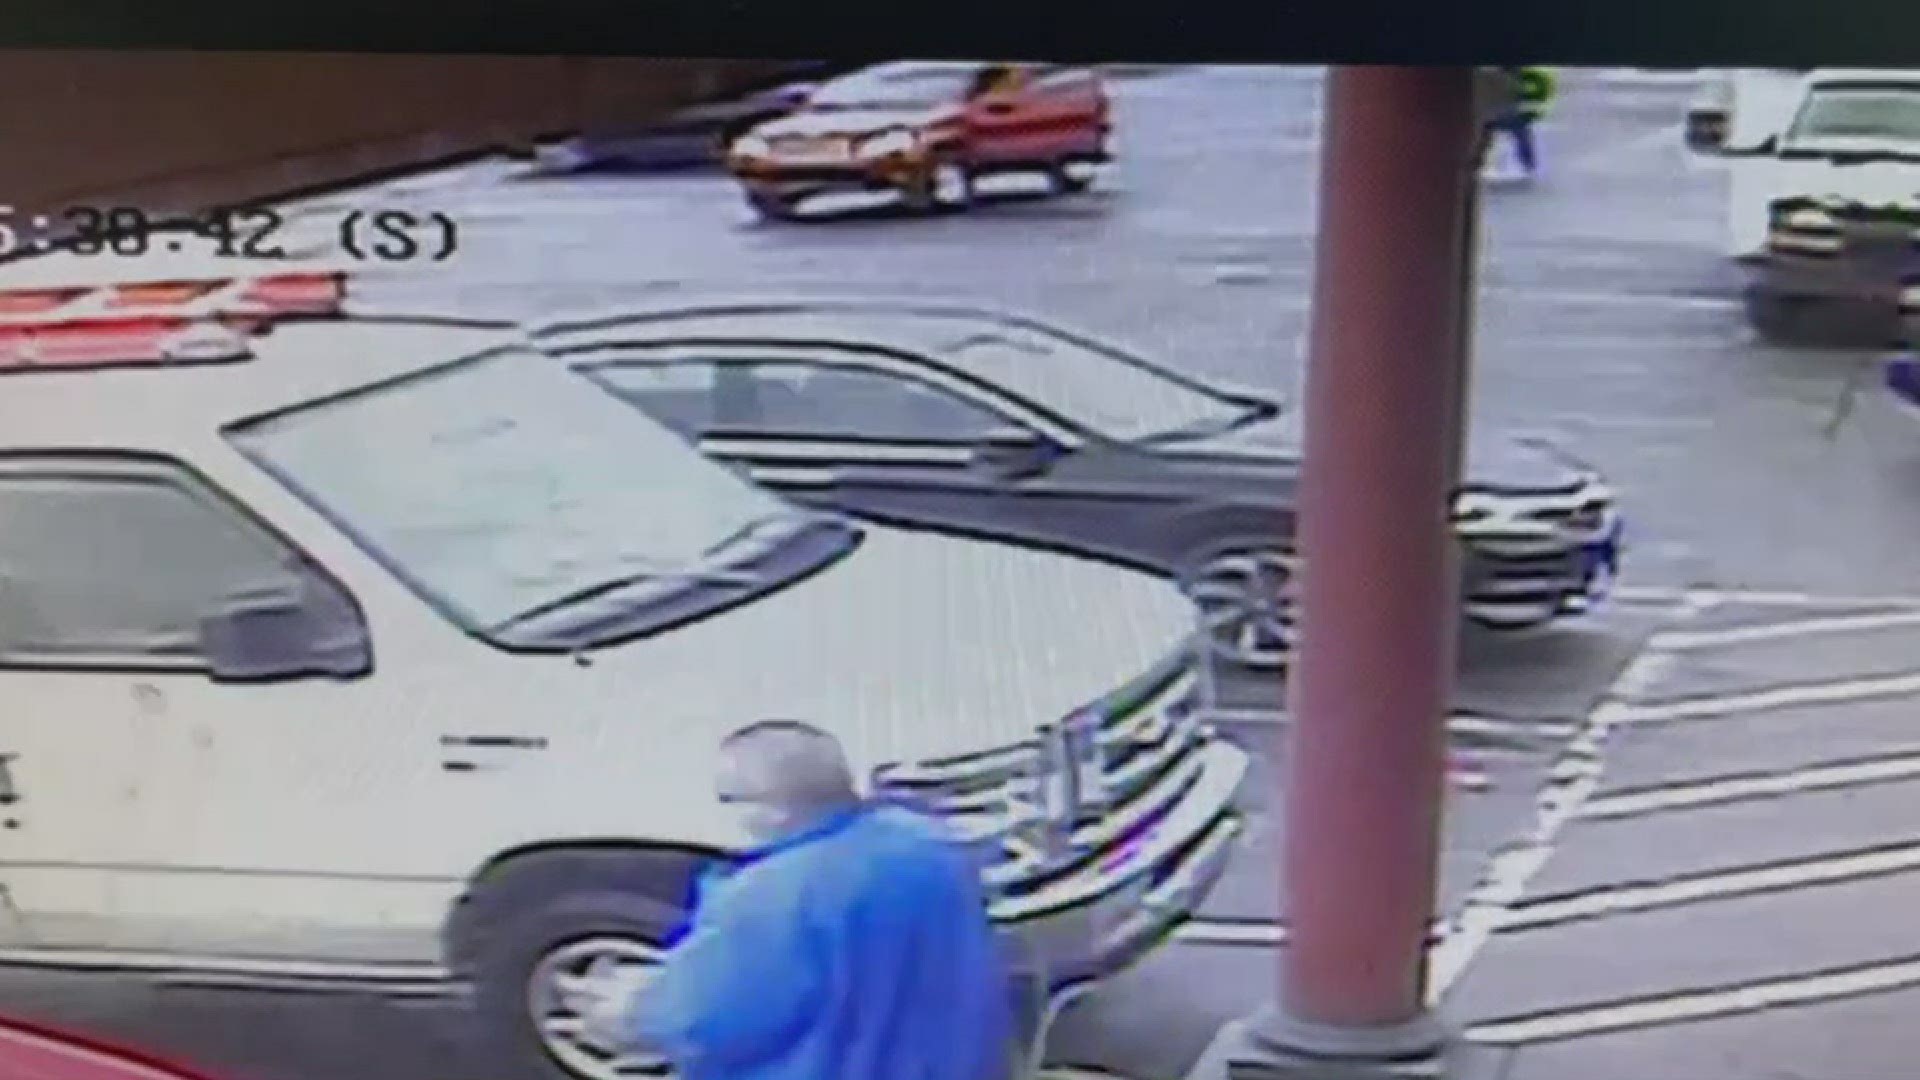 Video from nearby business shows attack